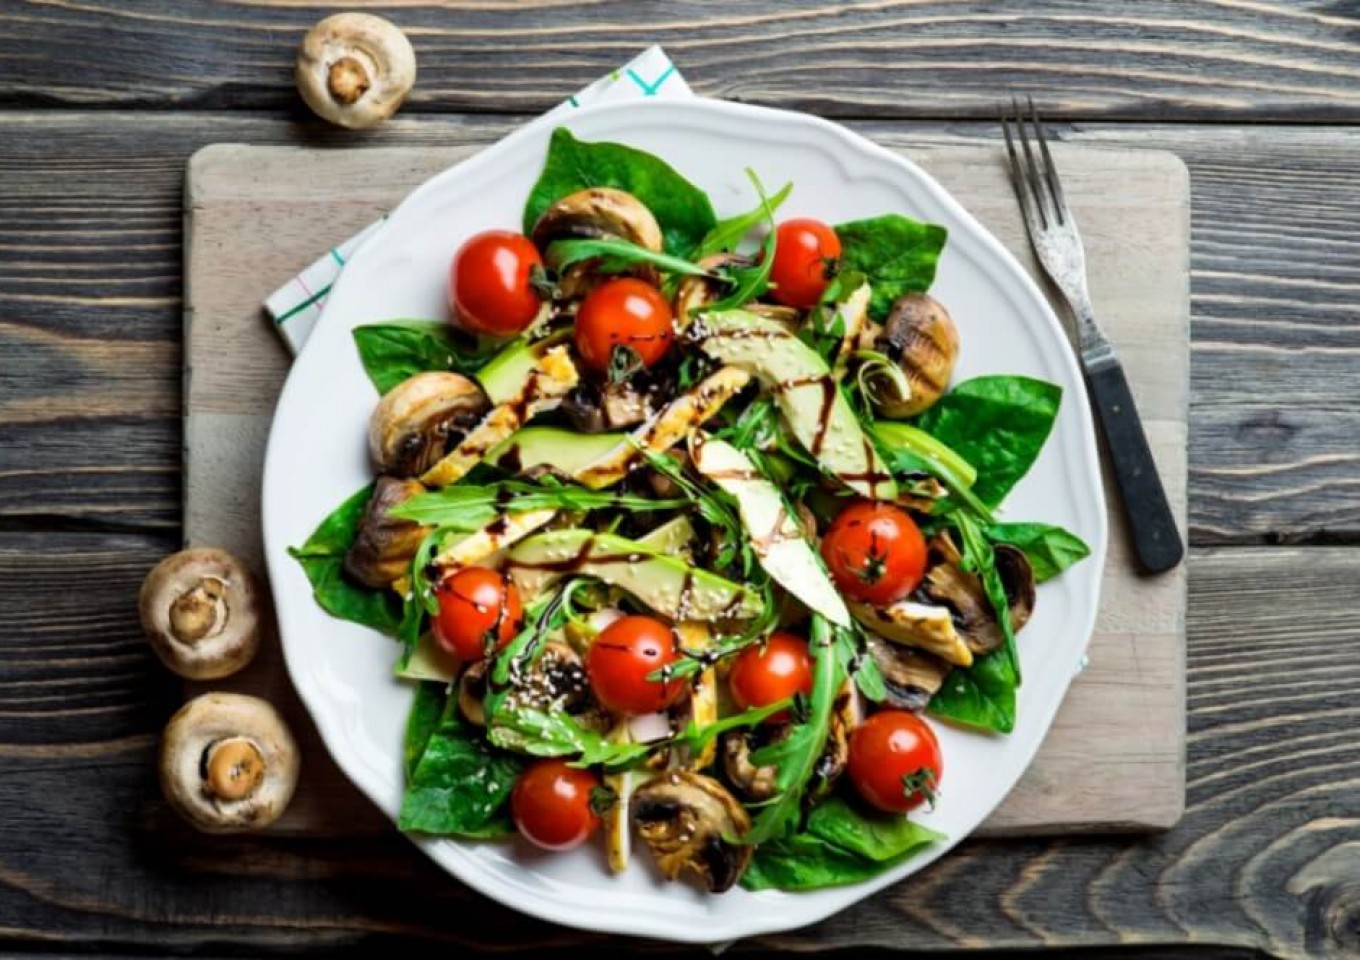 Grilled Chicken and Mushroom Salad with Honey Balsamic Dressing